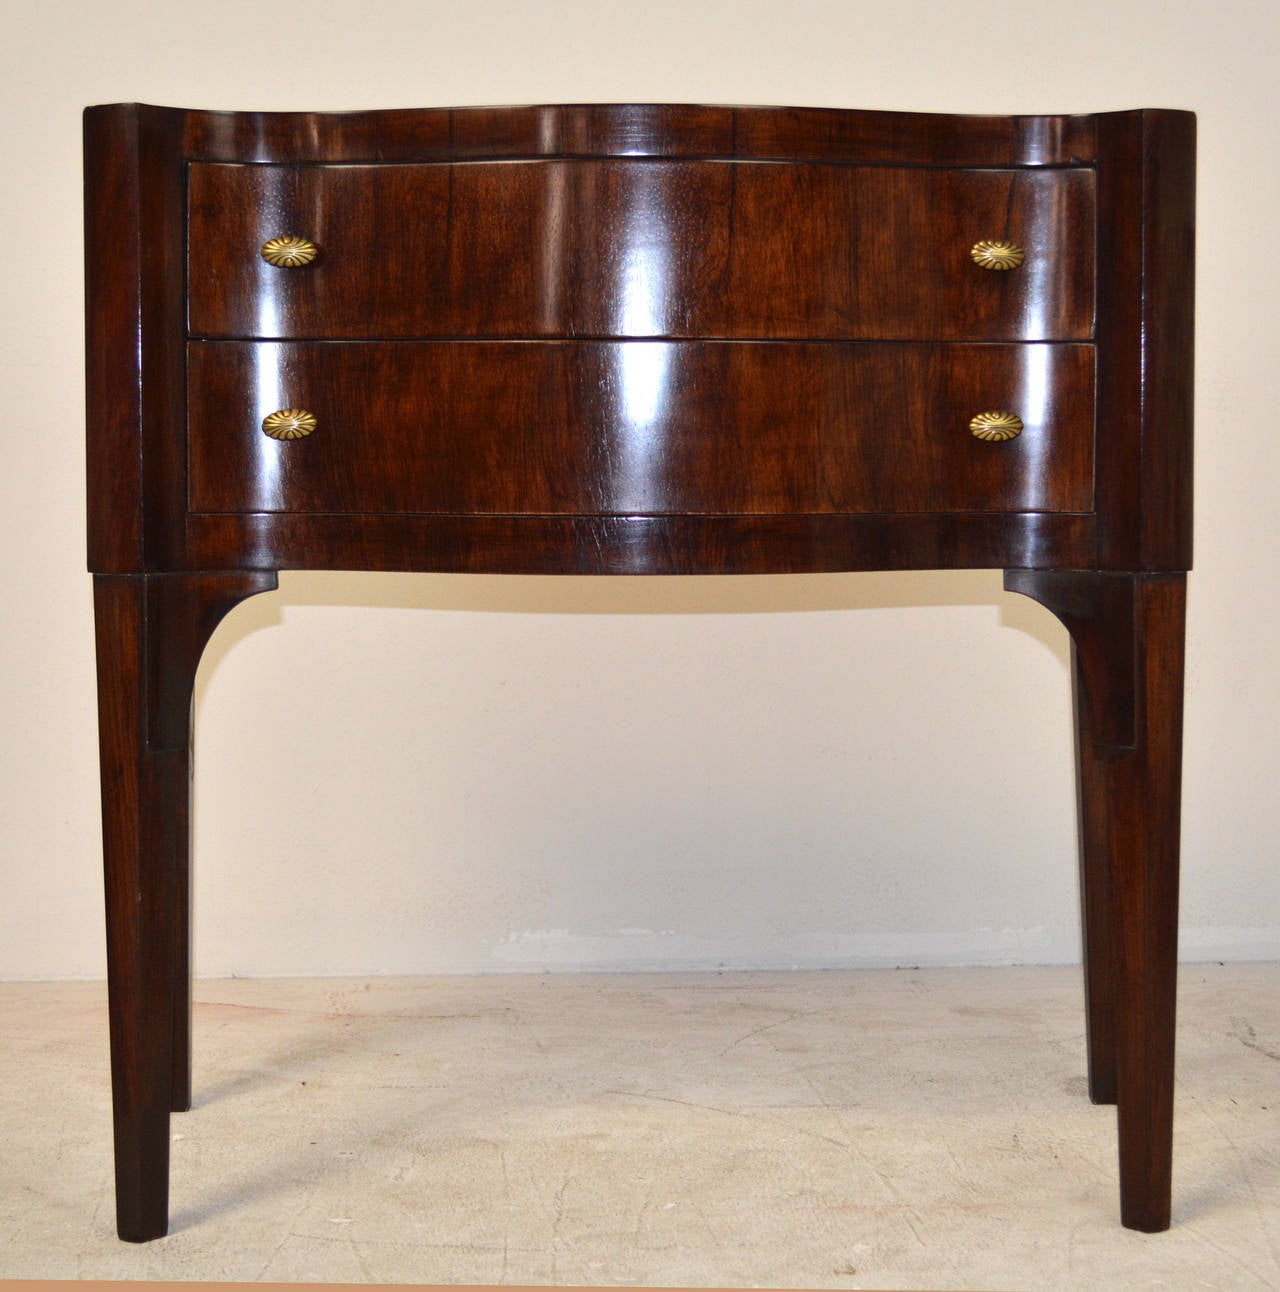 A rare rosewood commode designed by Edward Wormley for Dunbar. Small-scale and deeply sculpted front with tapered canted legs. Dunbar model no. 6335.